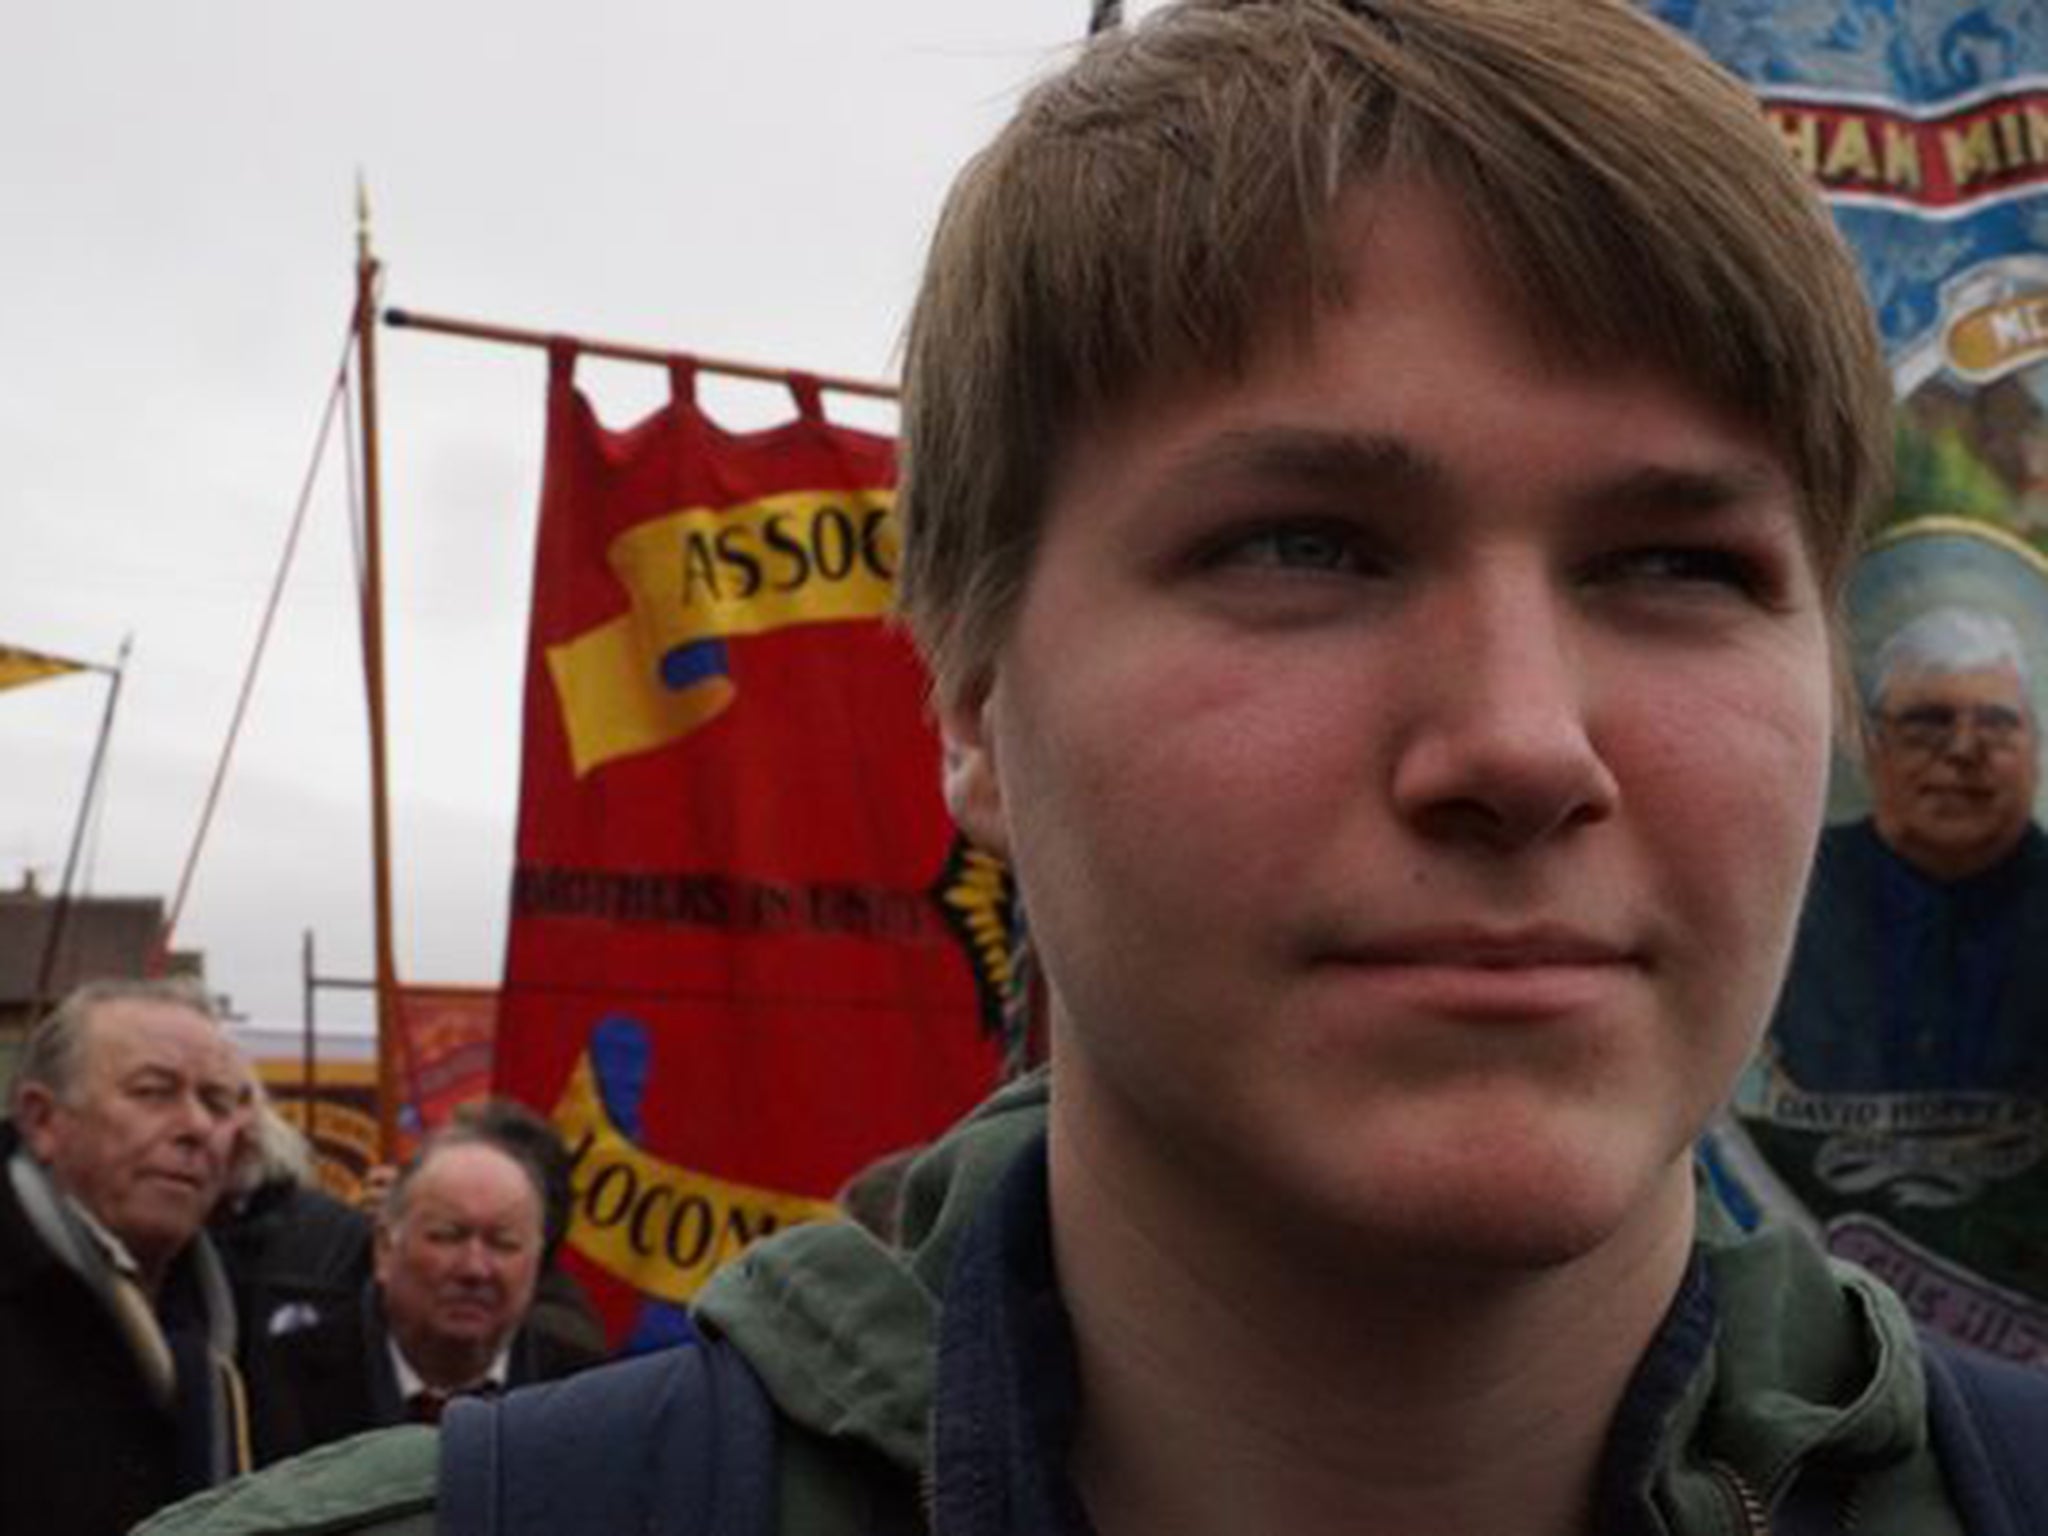 Tom Scott,19, Sheffield: “I will be voting, but I’m torn between the Greens and Labour.”